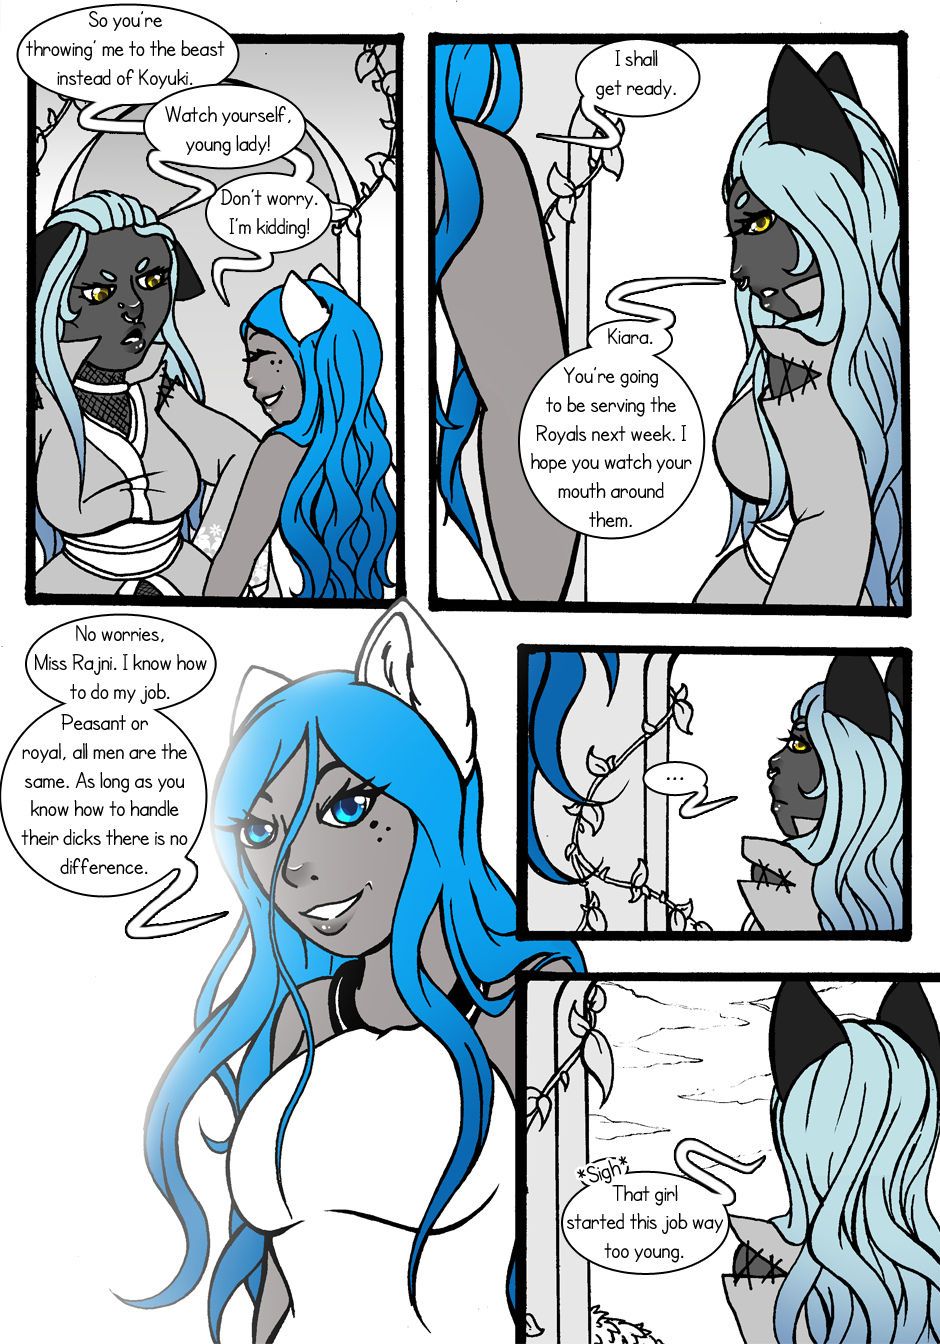 [Jeny-jen94] Between Kings and Queens [Ongoing] 6